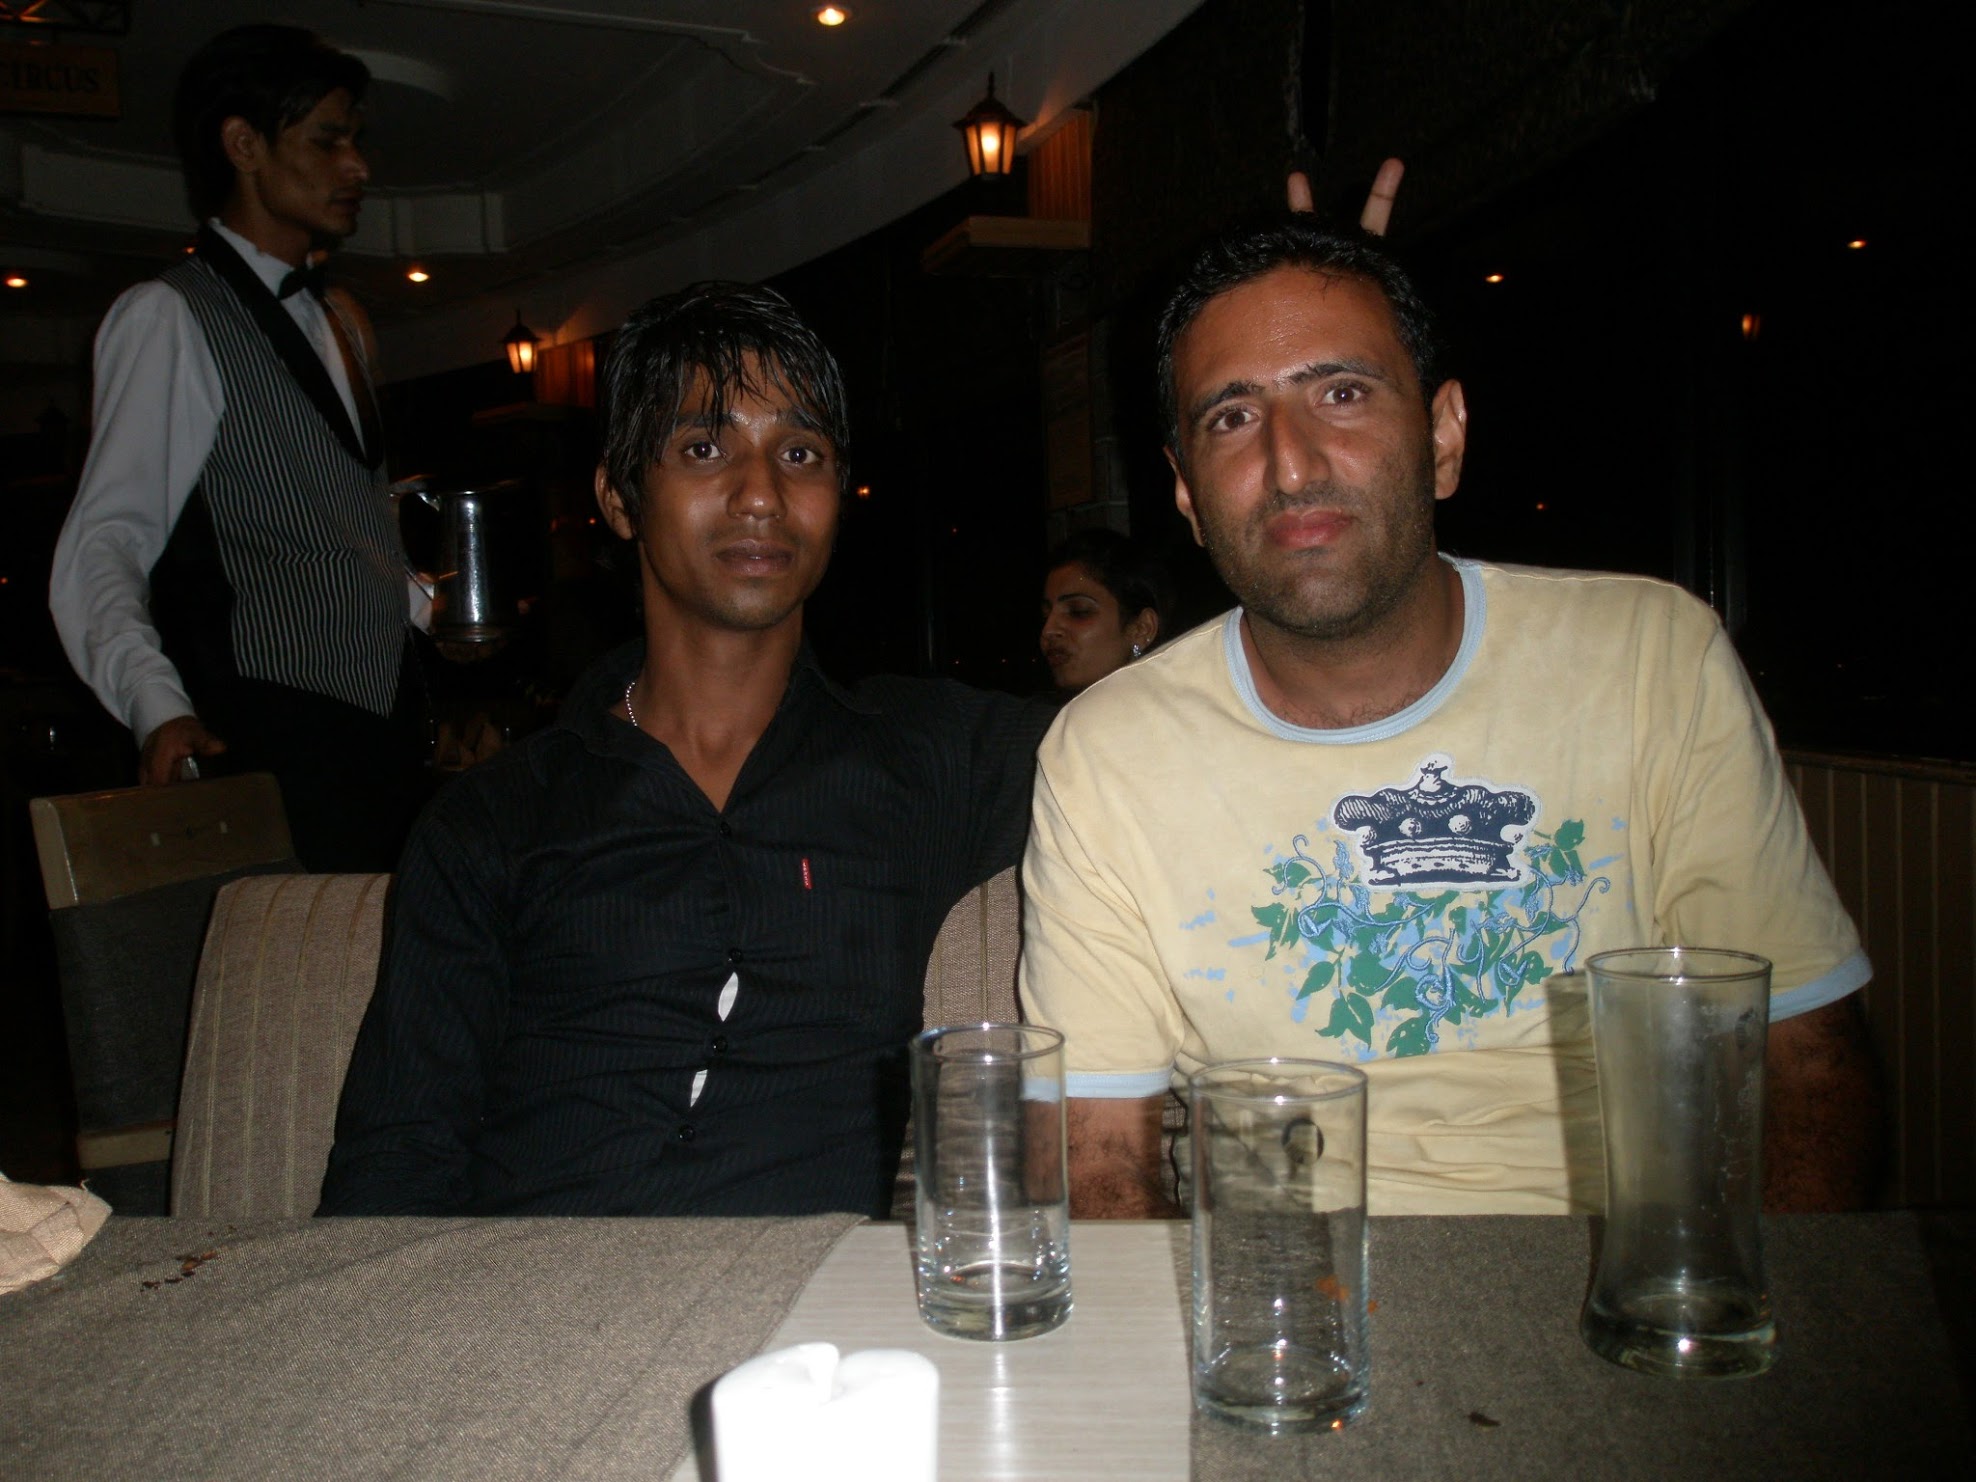 Two Indian men at a restaurant table. One weating a black shirt, the other a yellow t-shirt